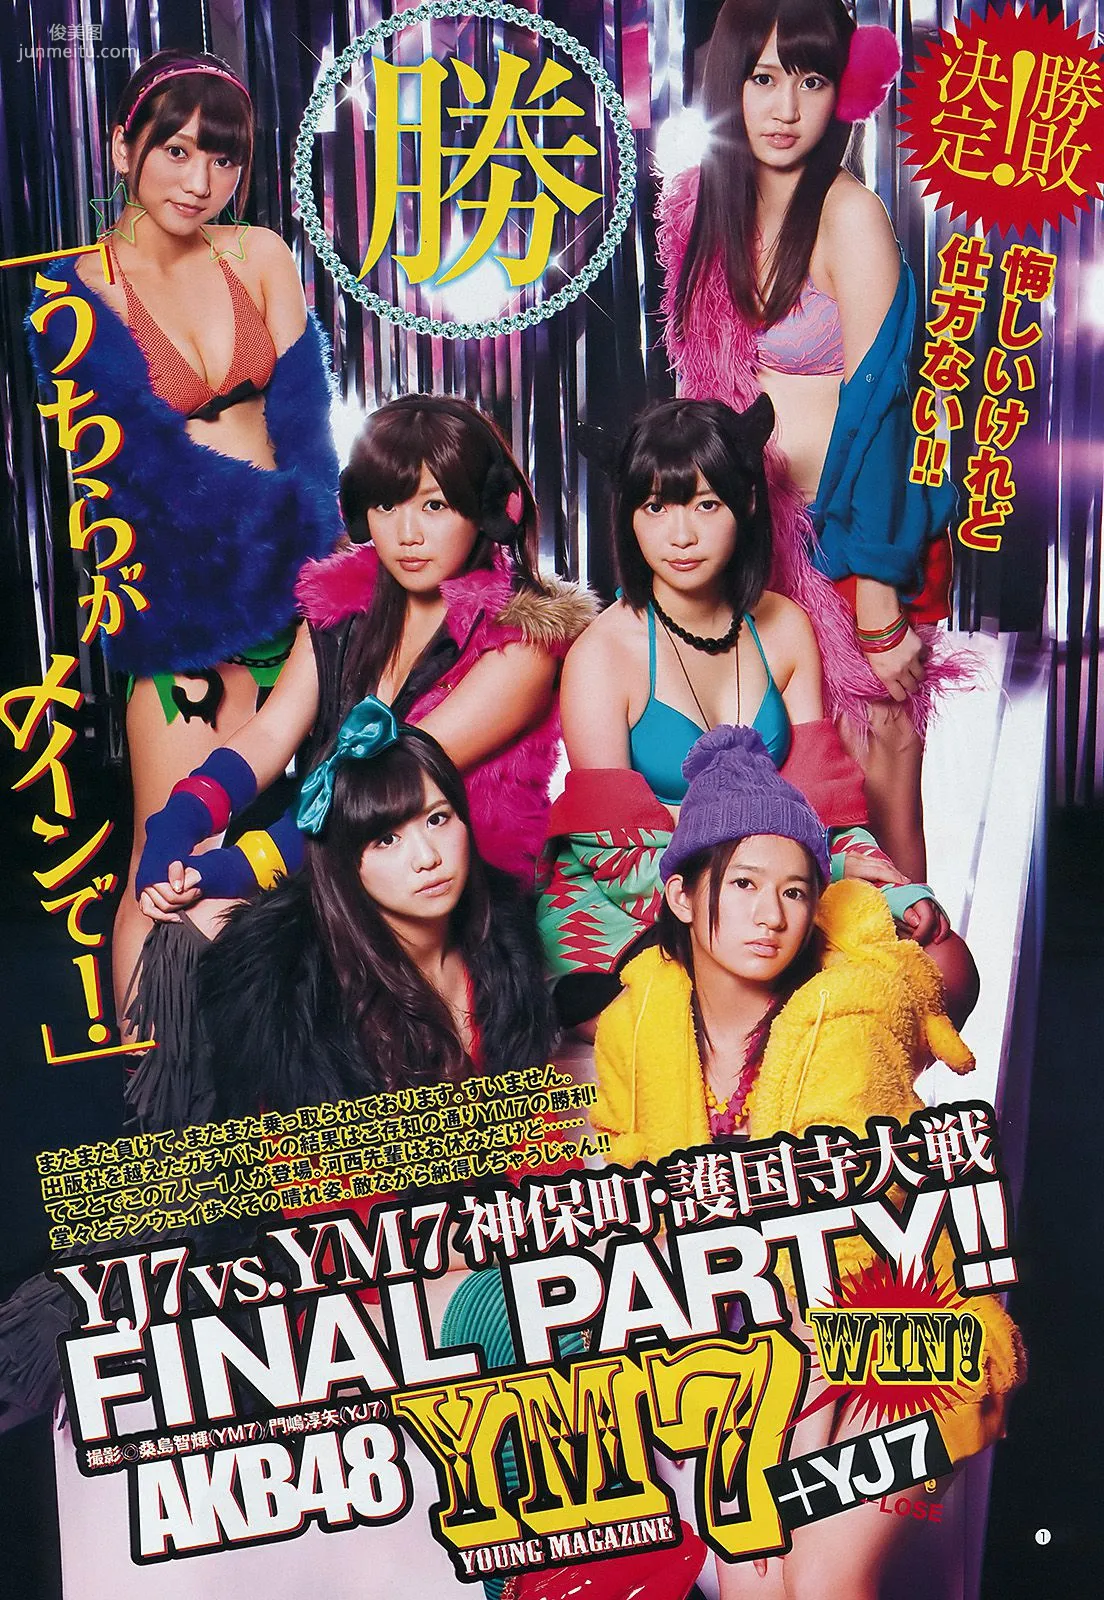 AKB48 YJ7 vs. YM7 神保町・護国寺大戦 FINAL PARTY [Weekly Young Jump] 2012年No.01 写真杂志2